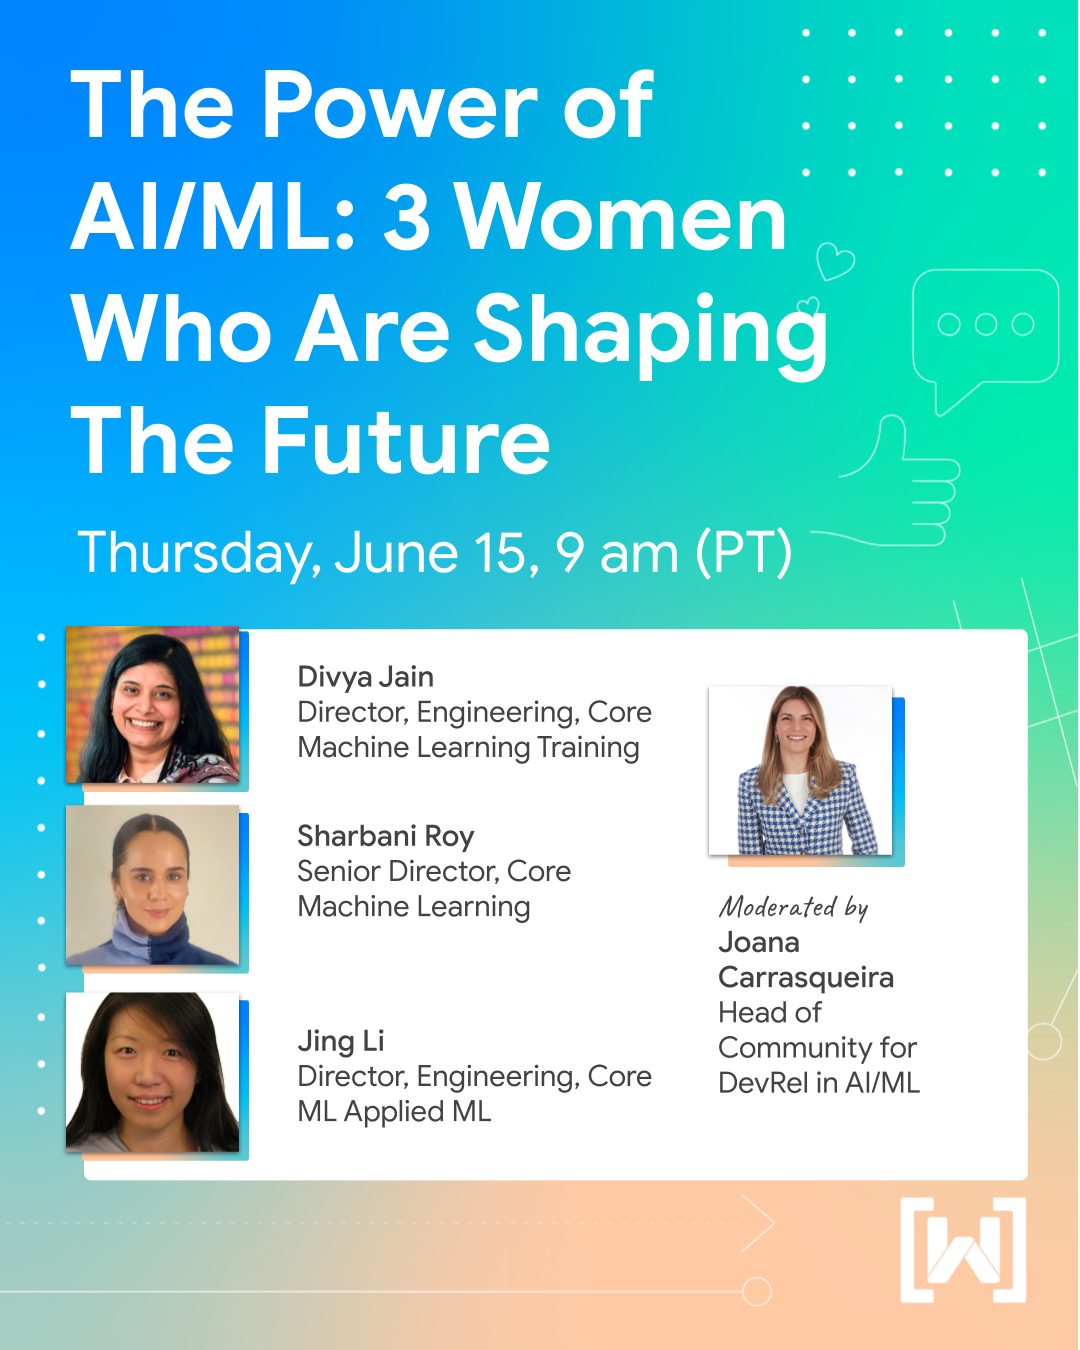 Image of a vertical banner with a gradient background. The banner features the event title 'The Power of AI/ML: 3 Women Who Are Shaping The Future'. The banner also includes the time and date of the event, the speakers' photos and titles.